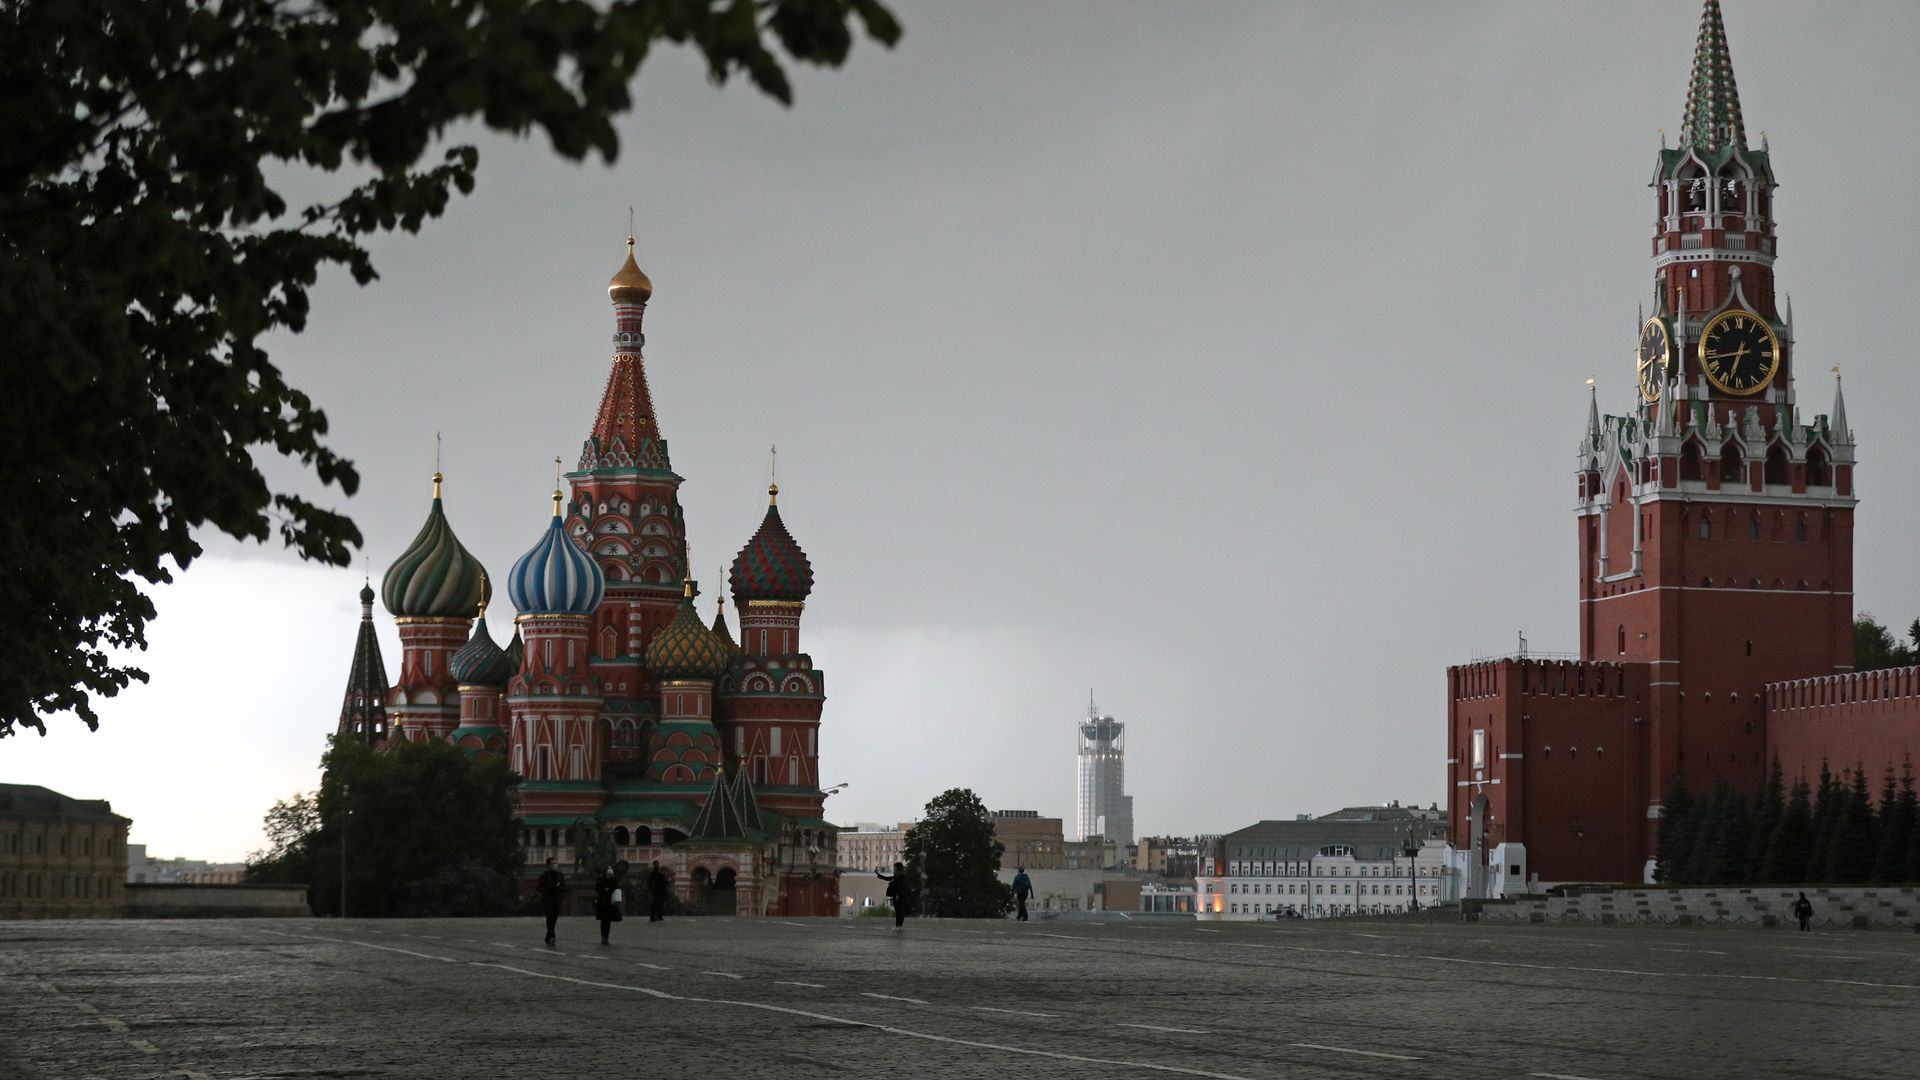 A view of Red Square. The Moscow authorities have extended the self-isolation regime through May 31